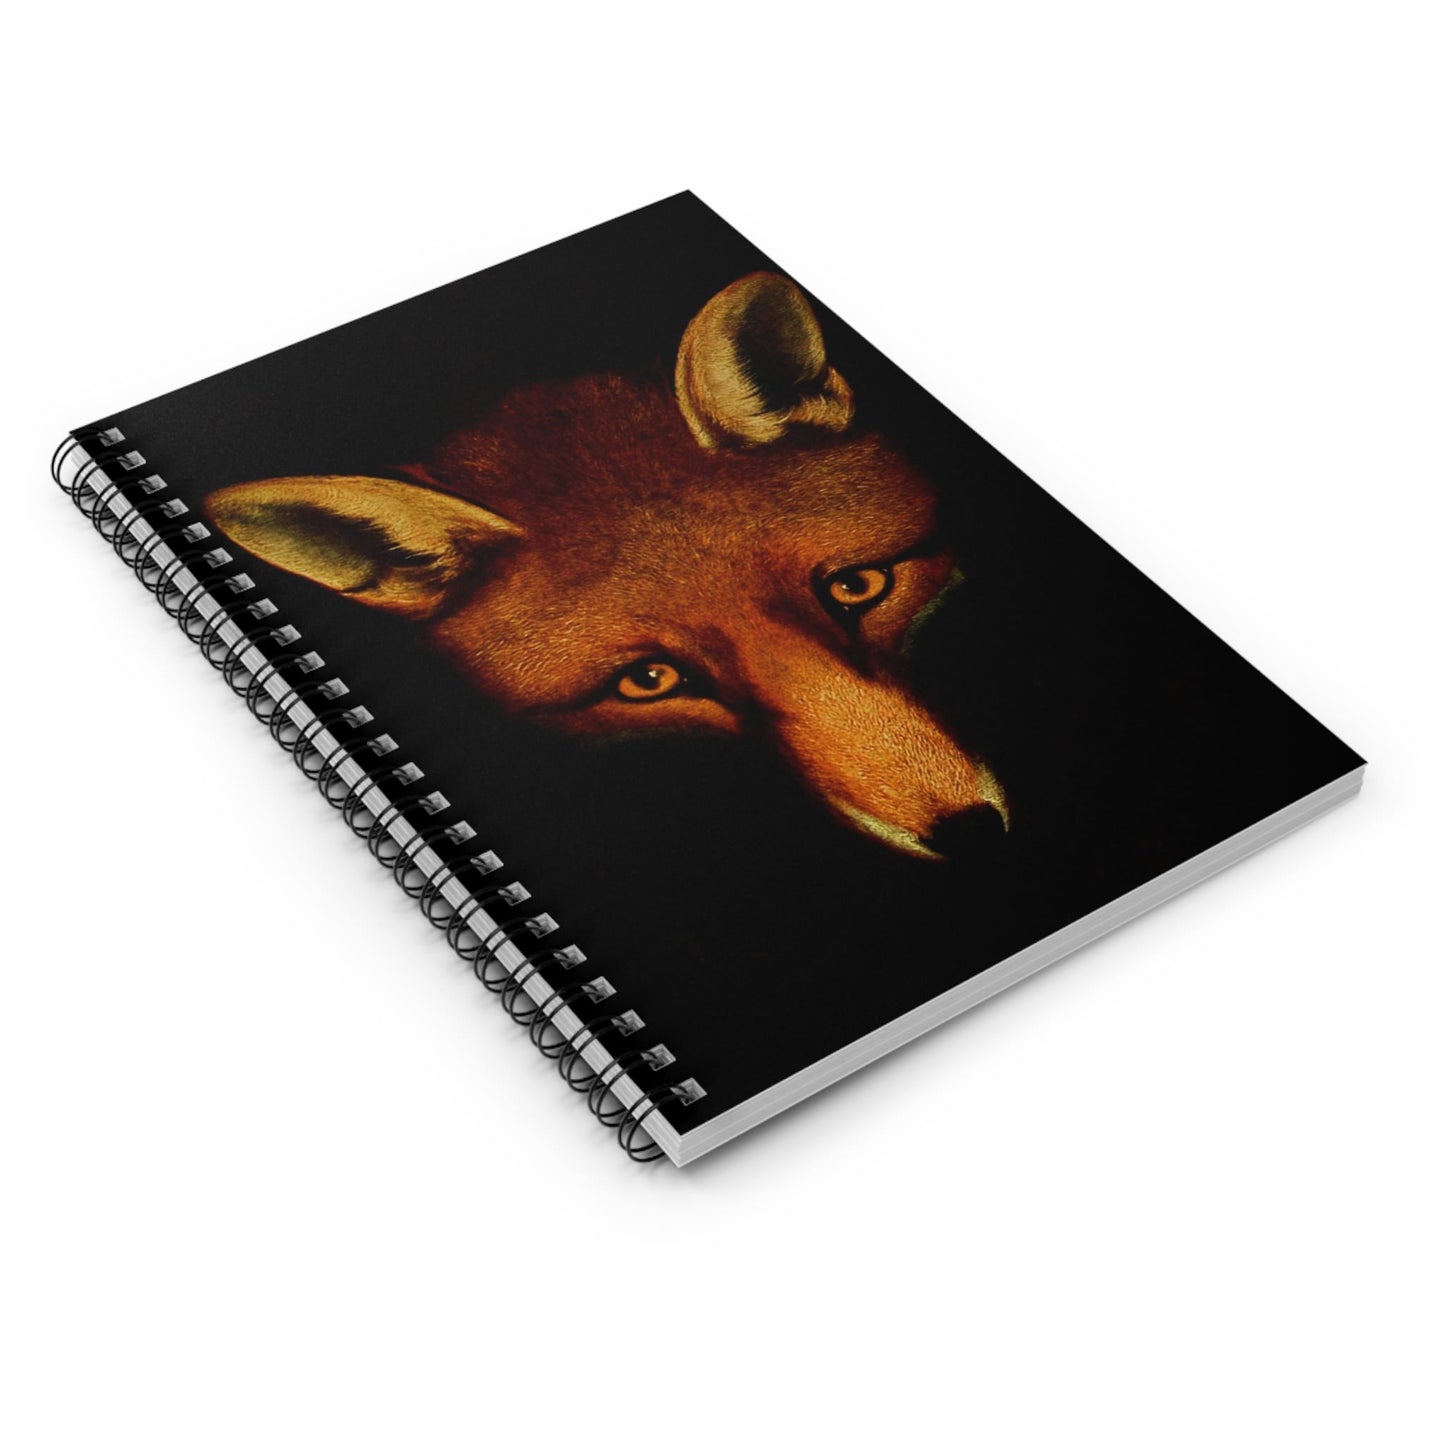 Animal Portrait Spiral Notebook Laying Flat on White Surface